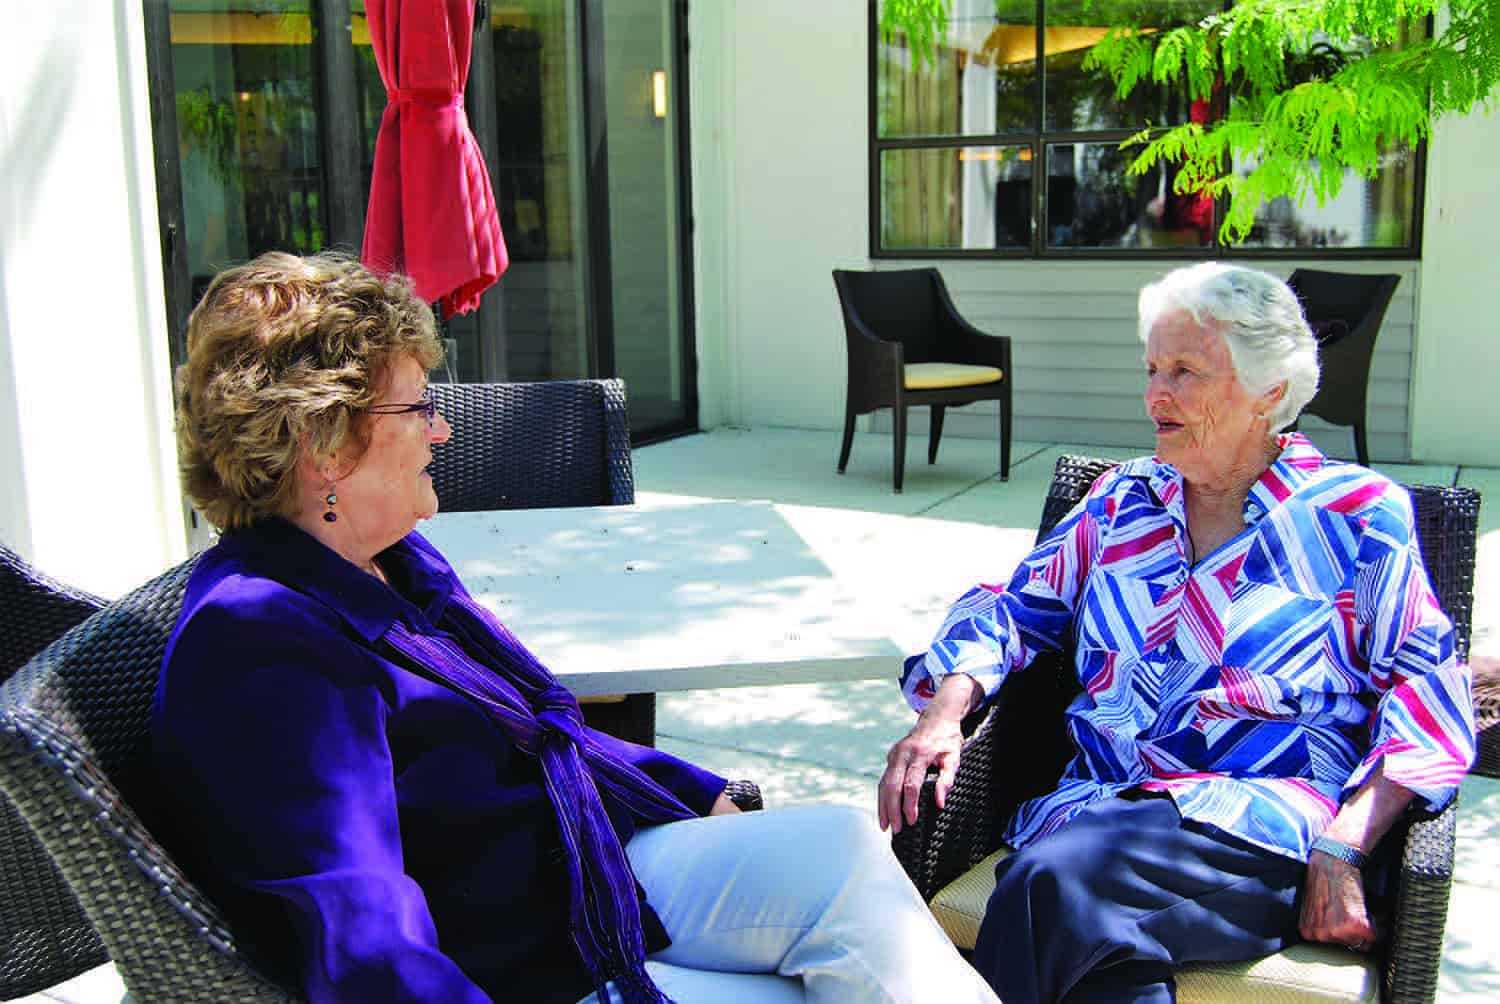 This senior living community offers Margie a comfortable place to live with activities and supports in place for seniors. Margie’s daughter, Gay, lives close by, making it easier to enjoy regular visits.